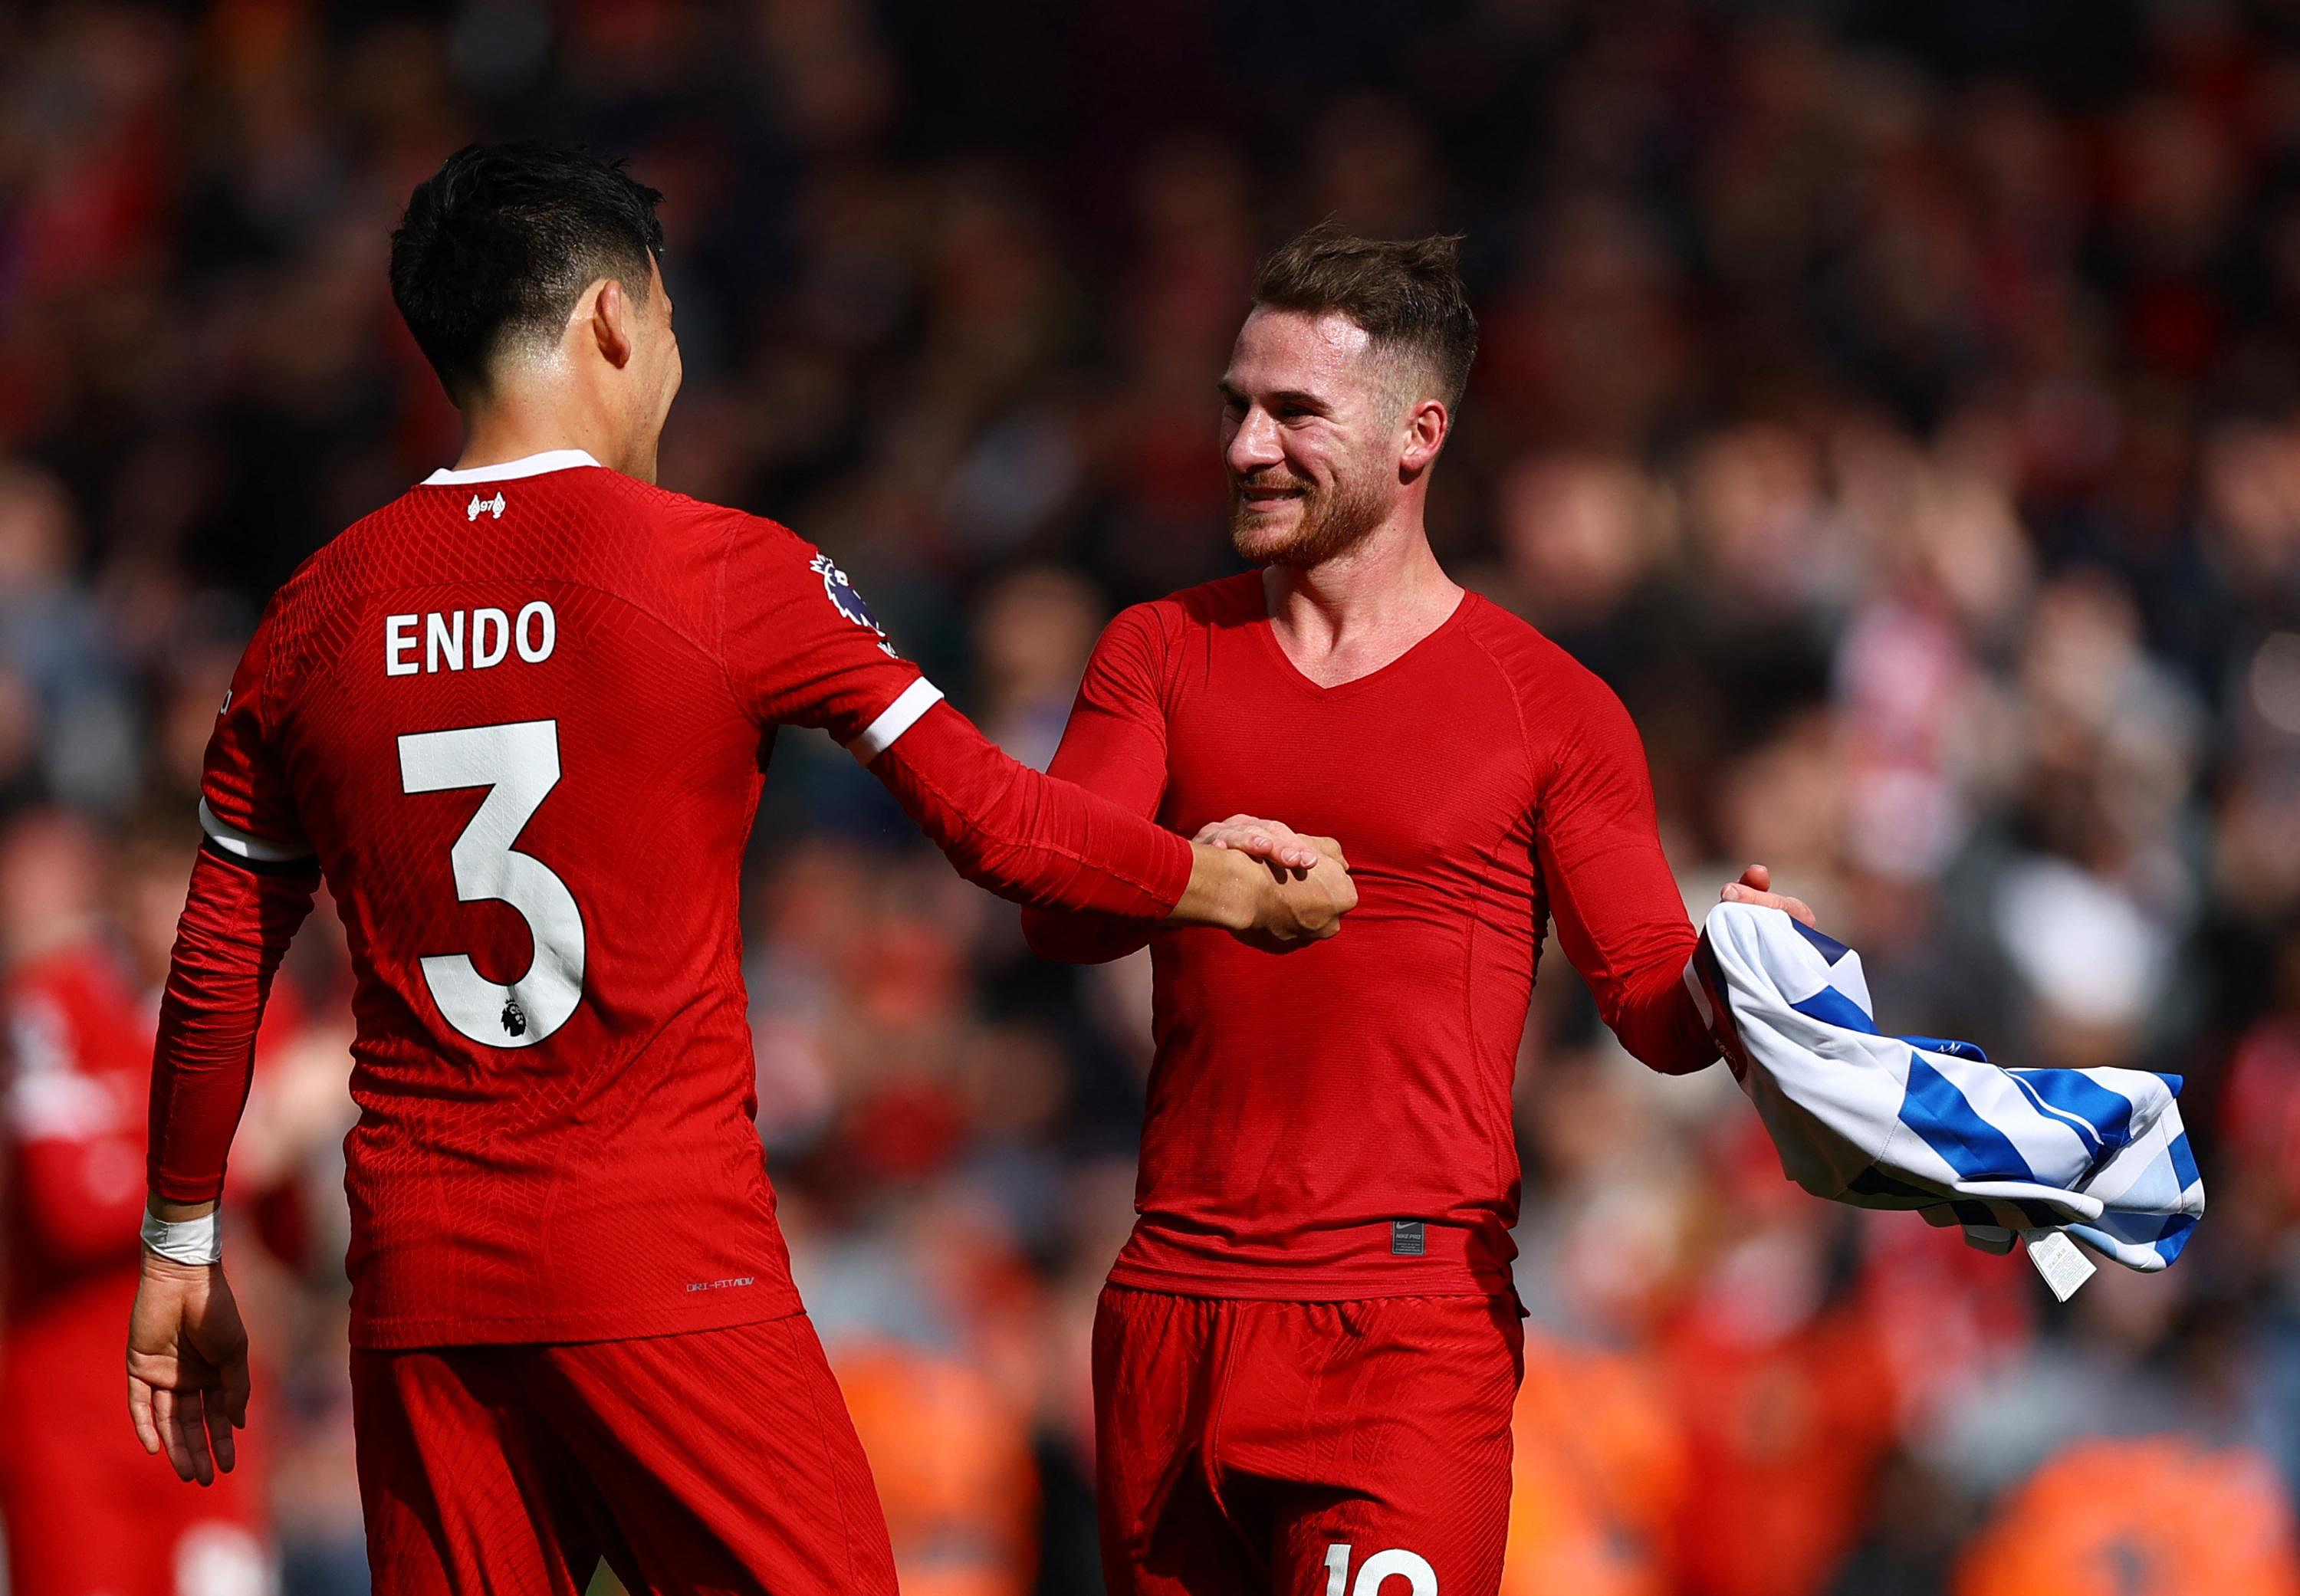 Premier League: Liverpool leader after victory against Brighton